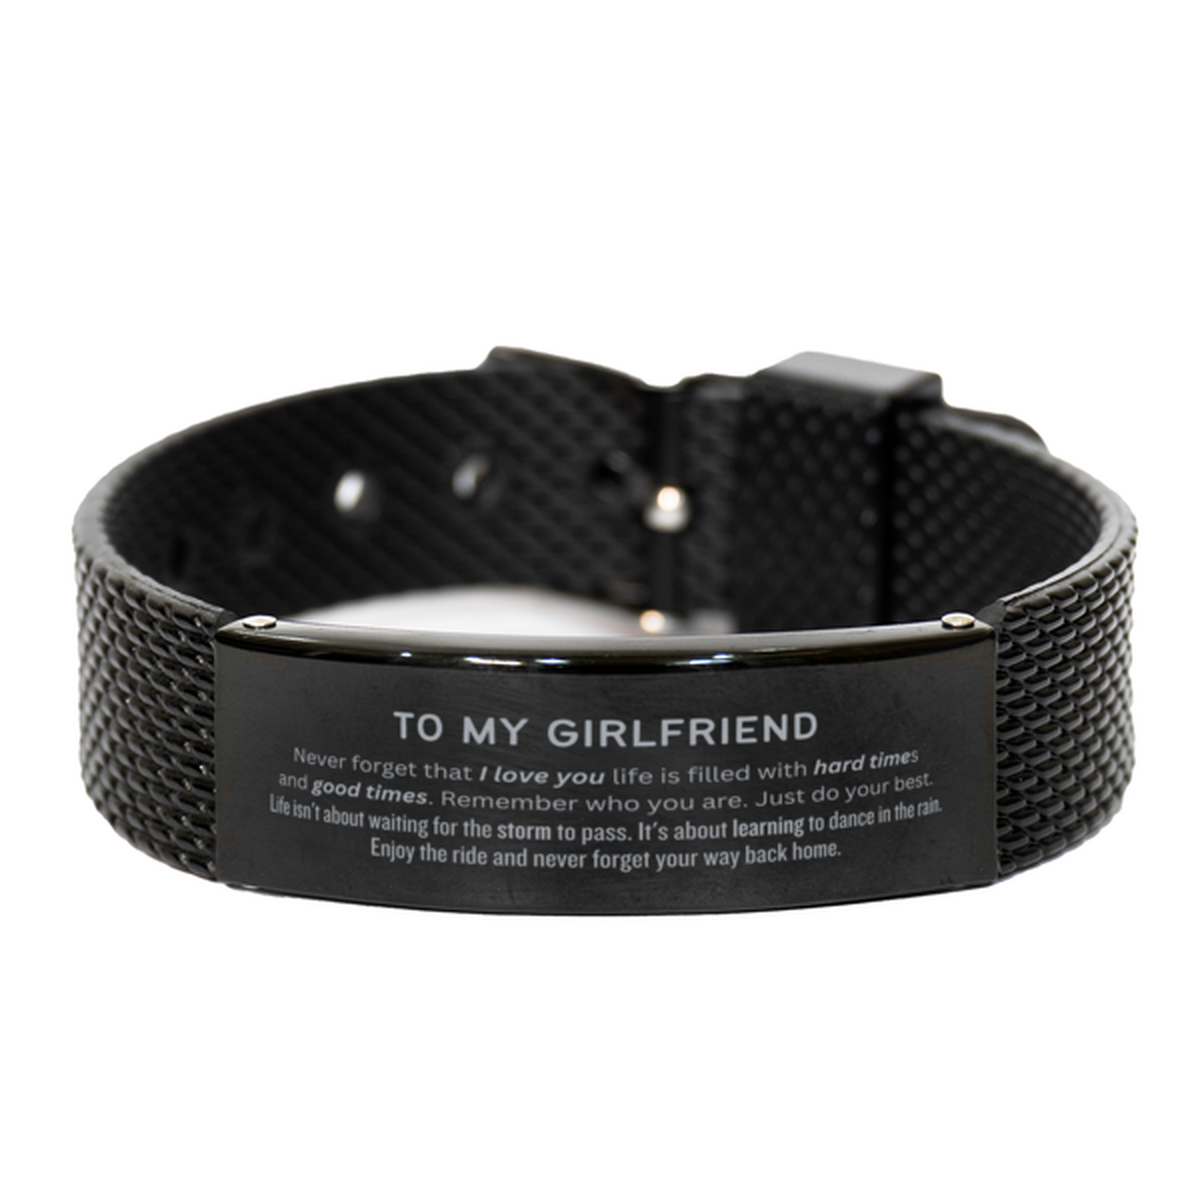 Christmas Girlfriend Black Shark Mesh Bracelet Gifts, To My Girlfriend Birthday Thank You Gifts For Girlfriend, Graduation Unique Gifts For Girlfriend To My Girlfriend Never forget that I love you life is filled with hard times and good times. Remember wh